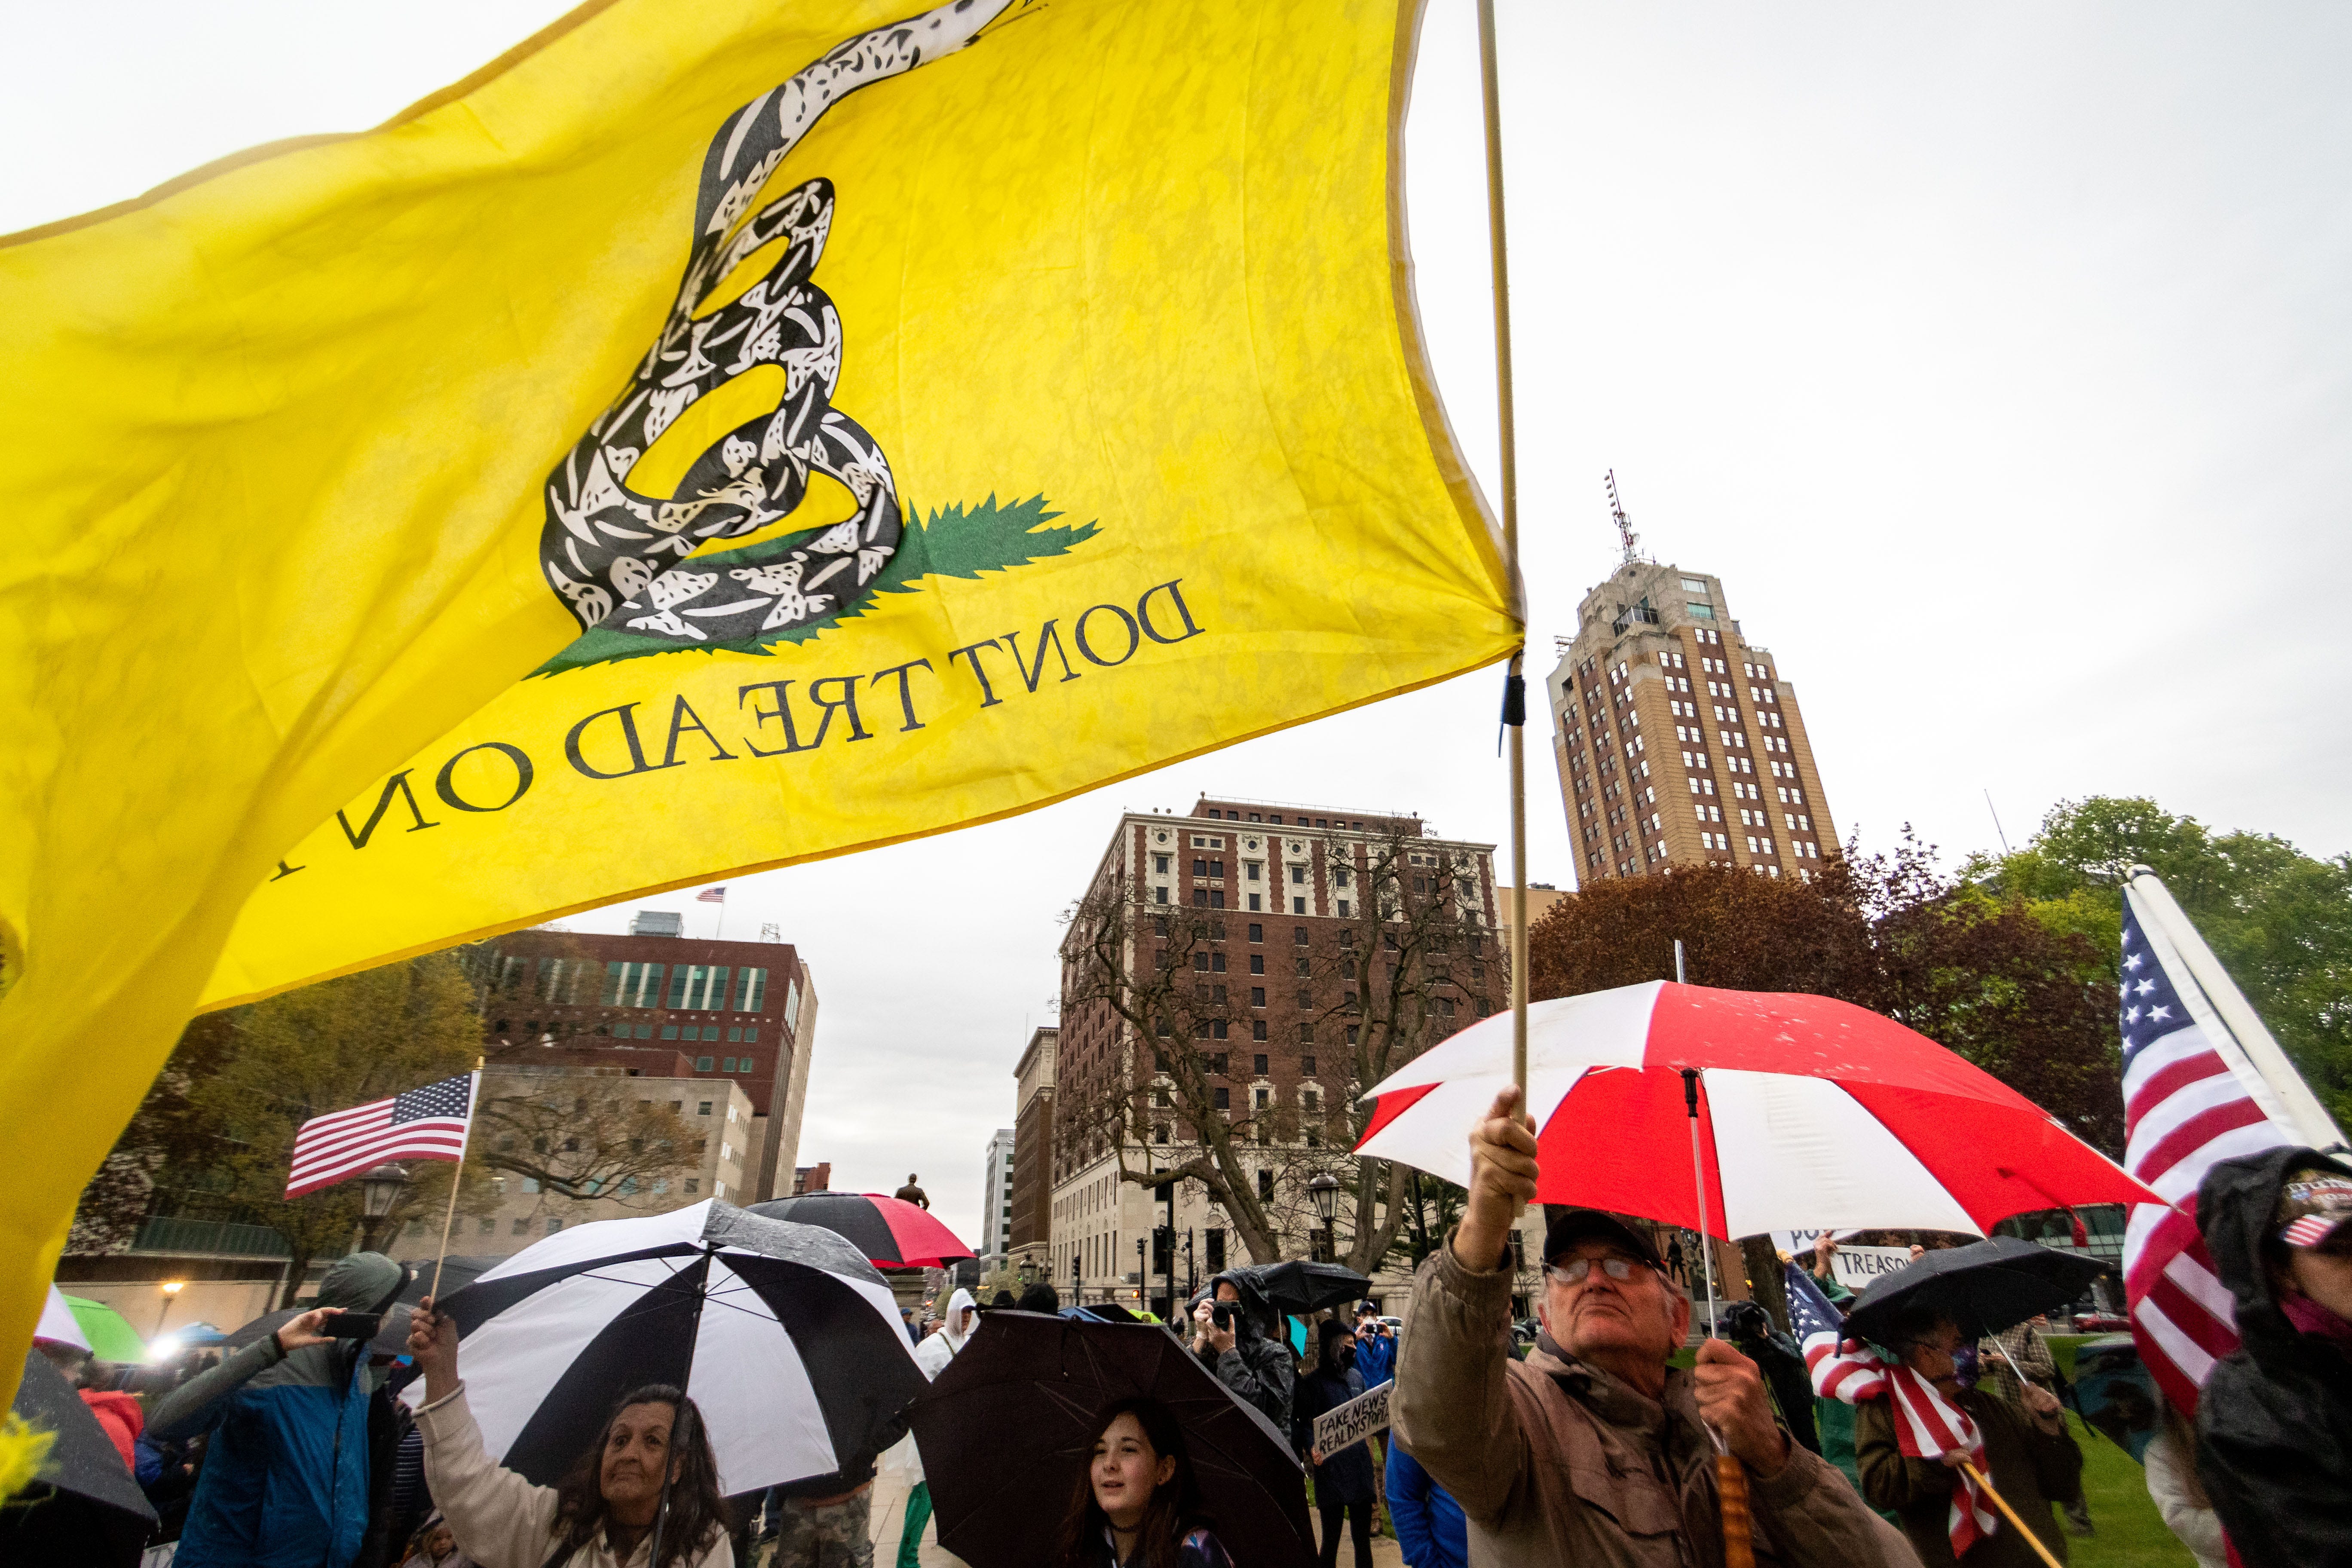 Mark Fortom, Macomb County Republican Chairman, flies the Gadsden flag at the protest.